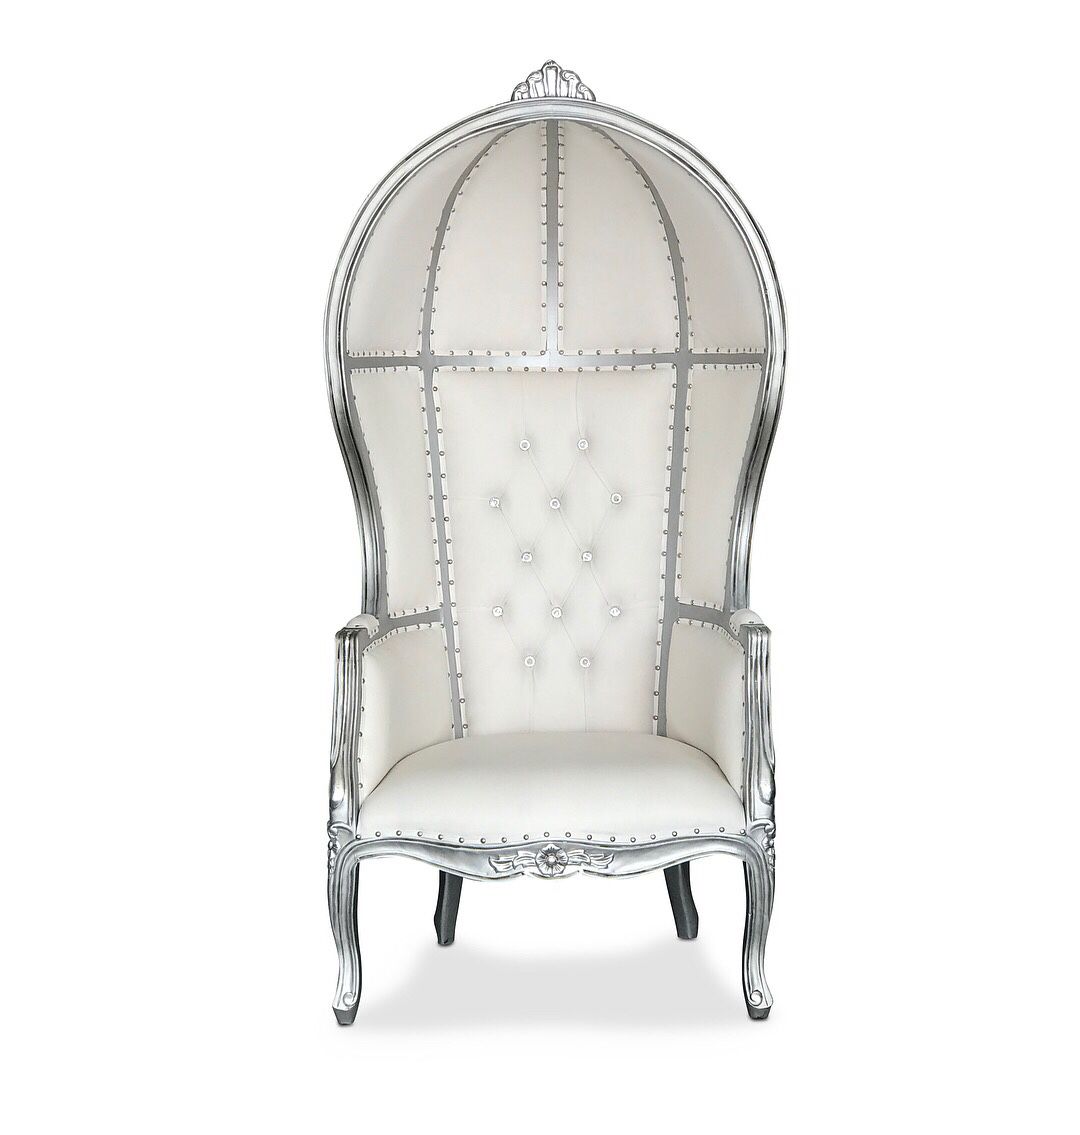 Free nationwide delivery | silver white porter dome canopy balloon bonnet chairs throne king queen princess royal baroque wedding event party photogr